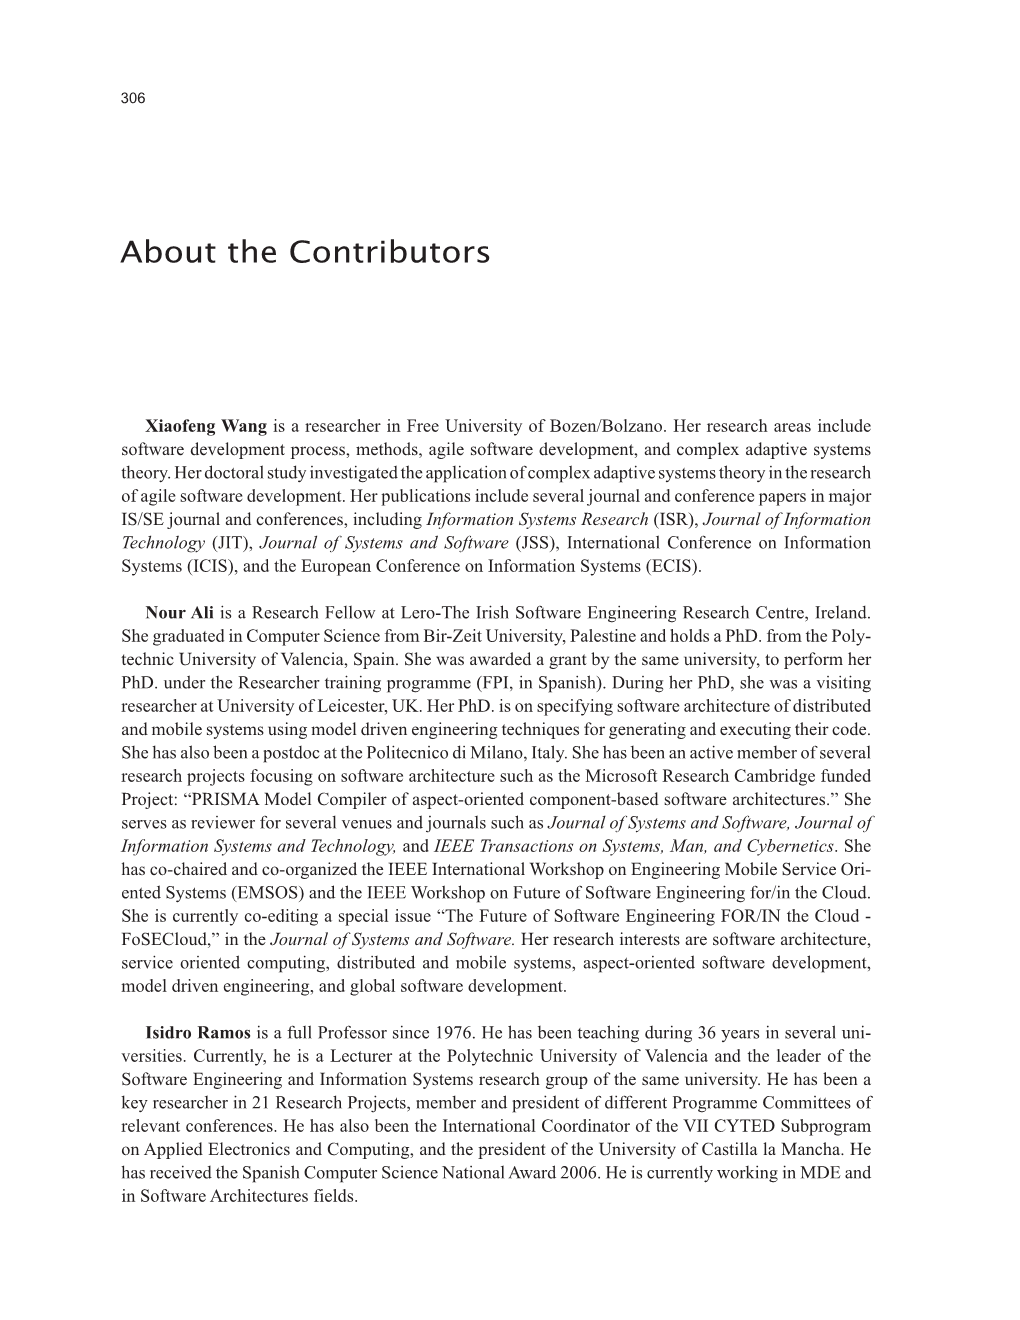 About the Contributors